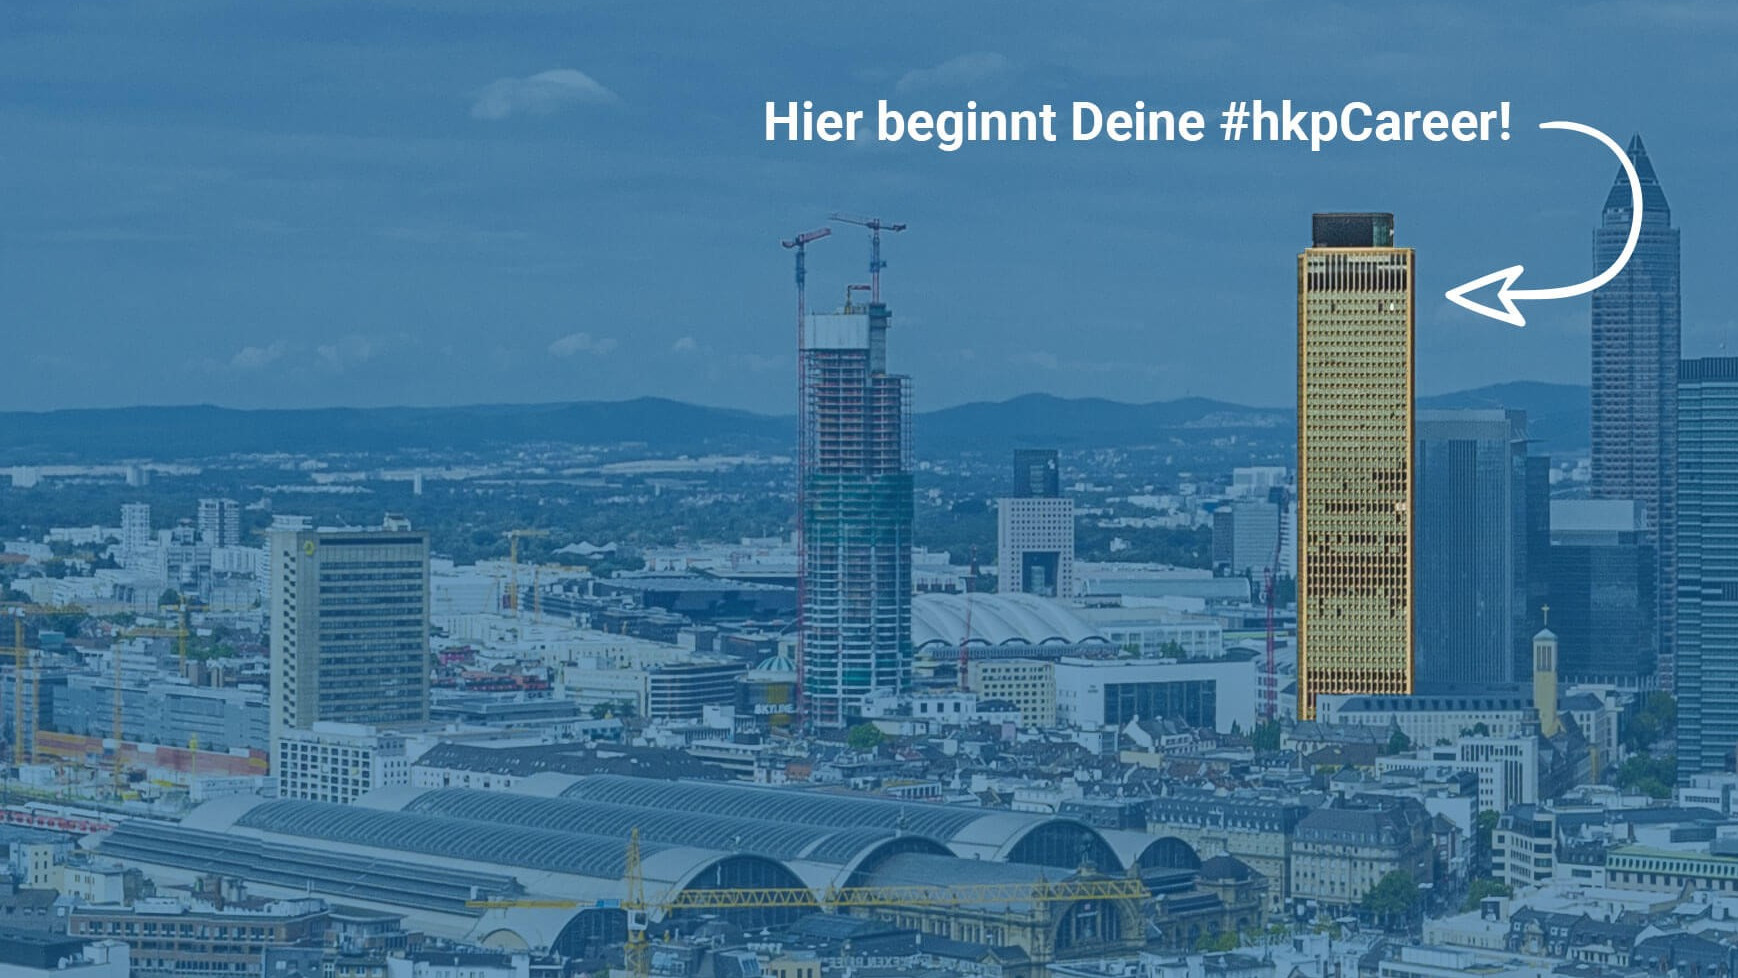 Event Consulting Experience Live: das hkp/// group Case Study Event